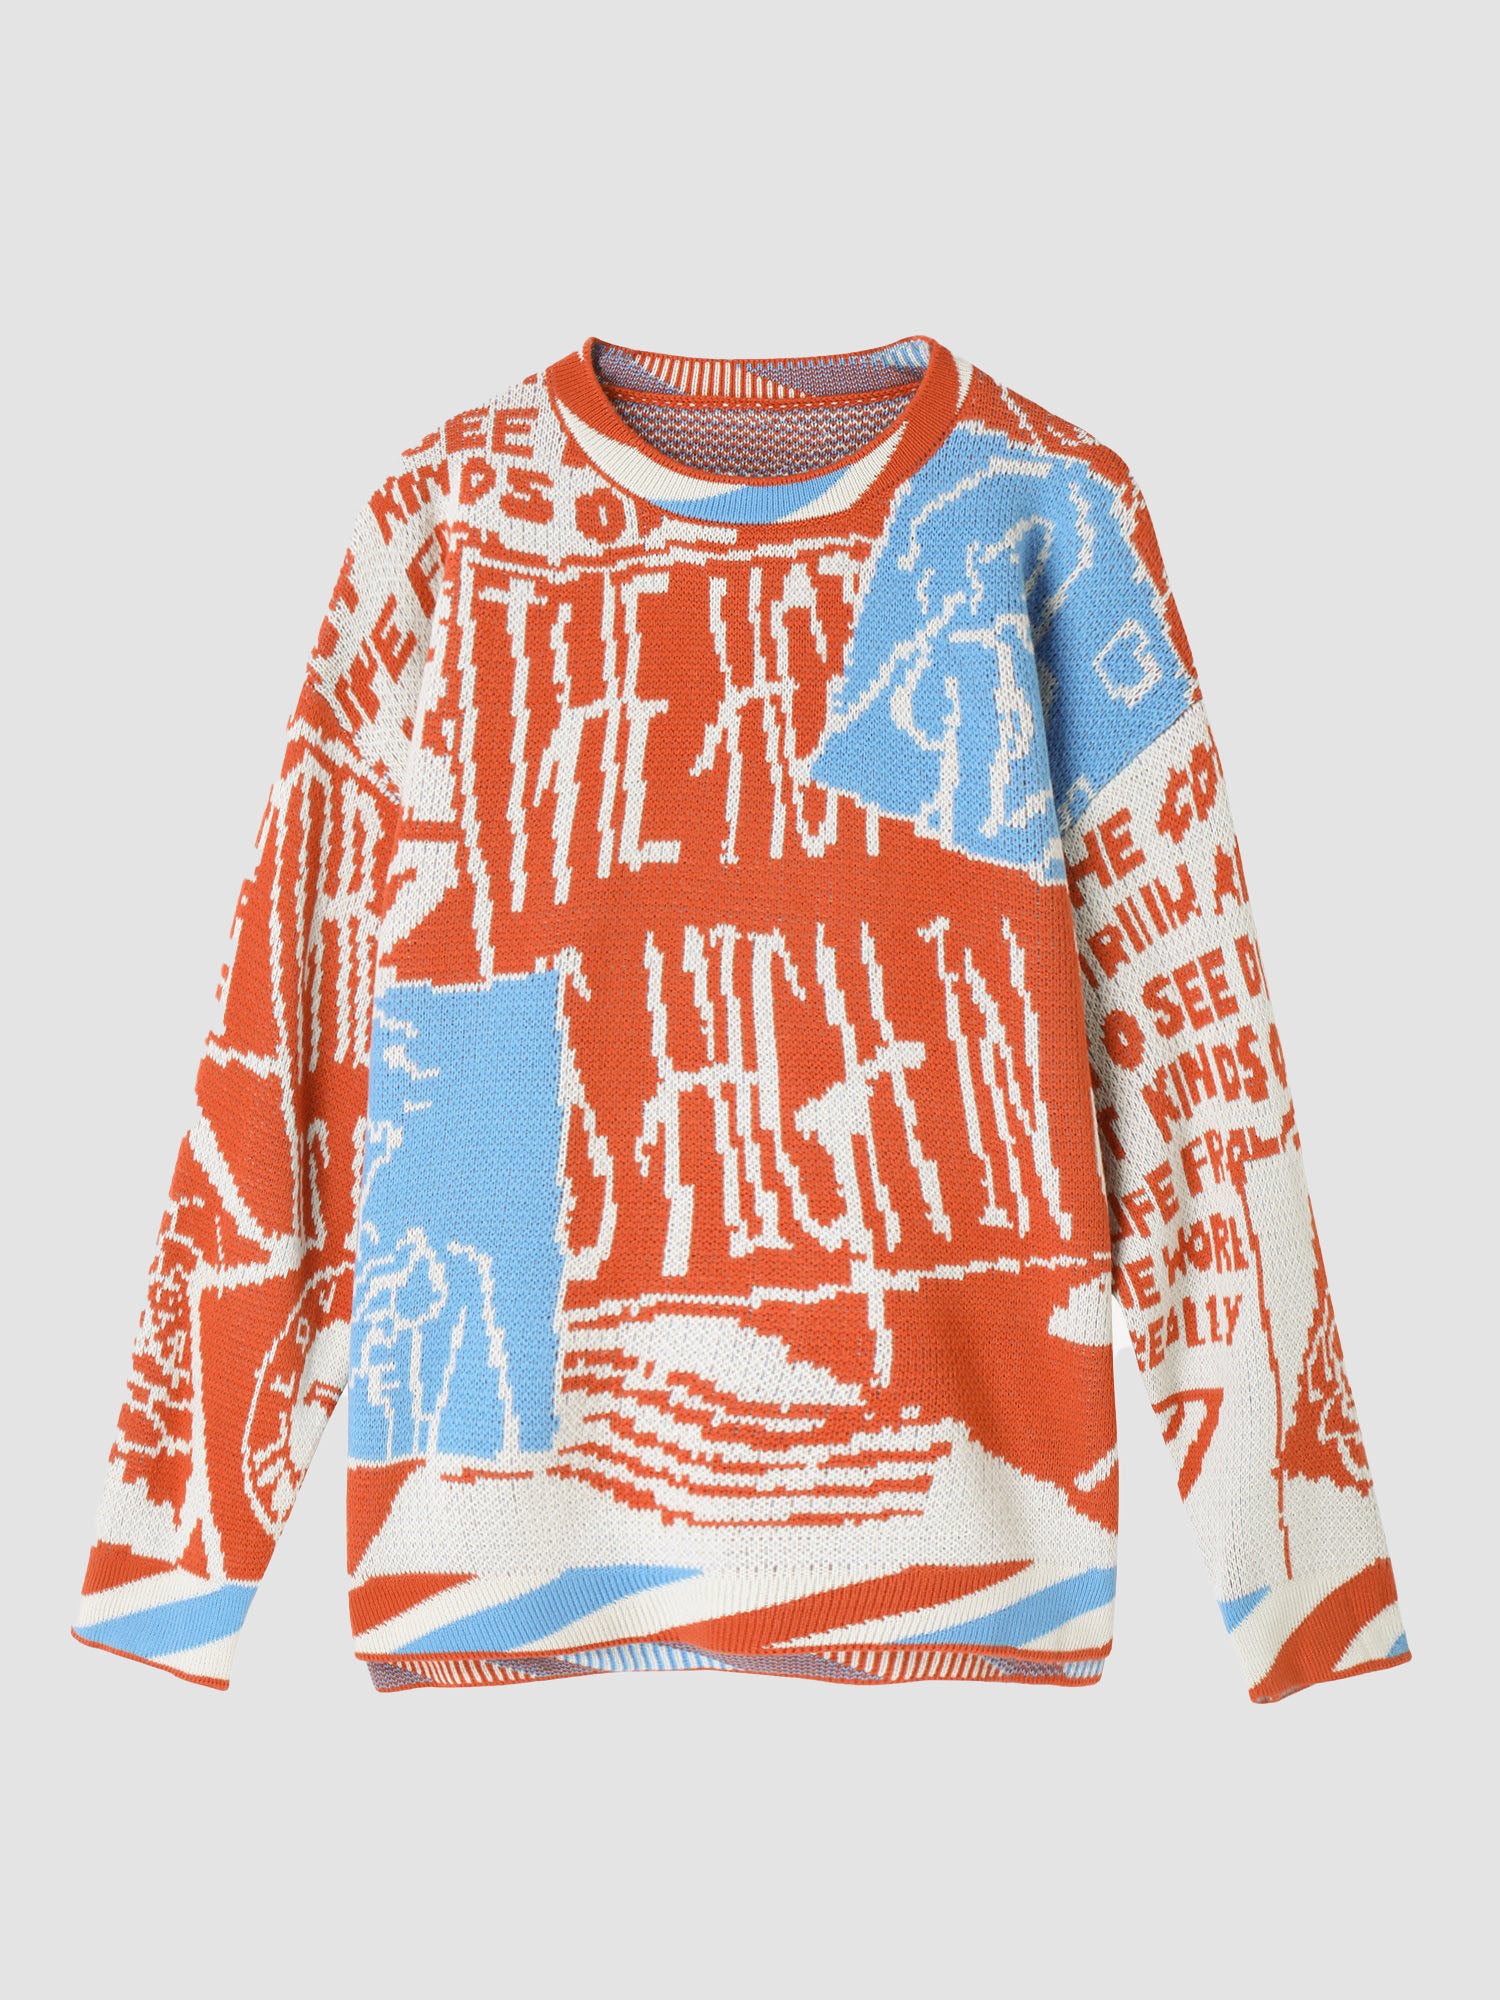 JUSTNOTAG Sketch Illustration Graphic Knitted Sweater